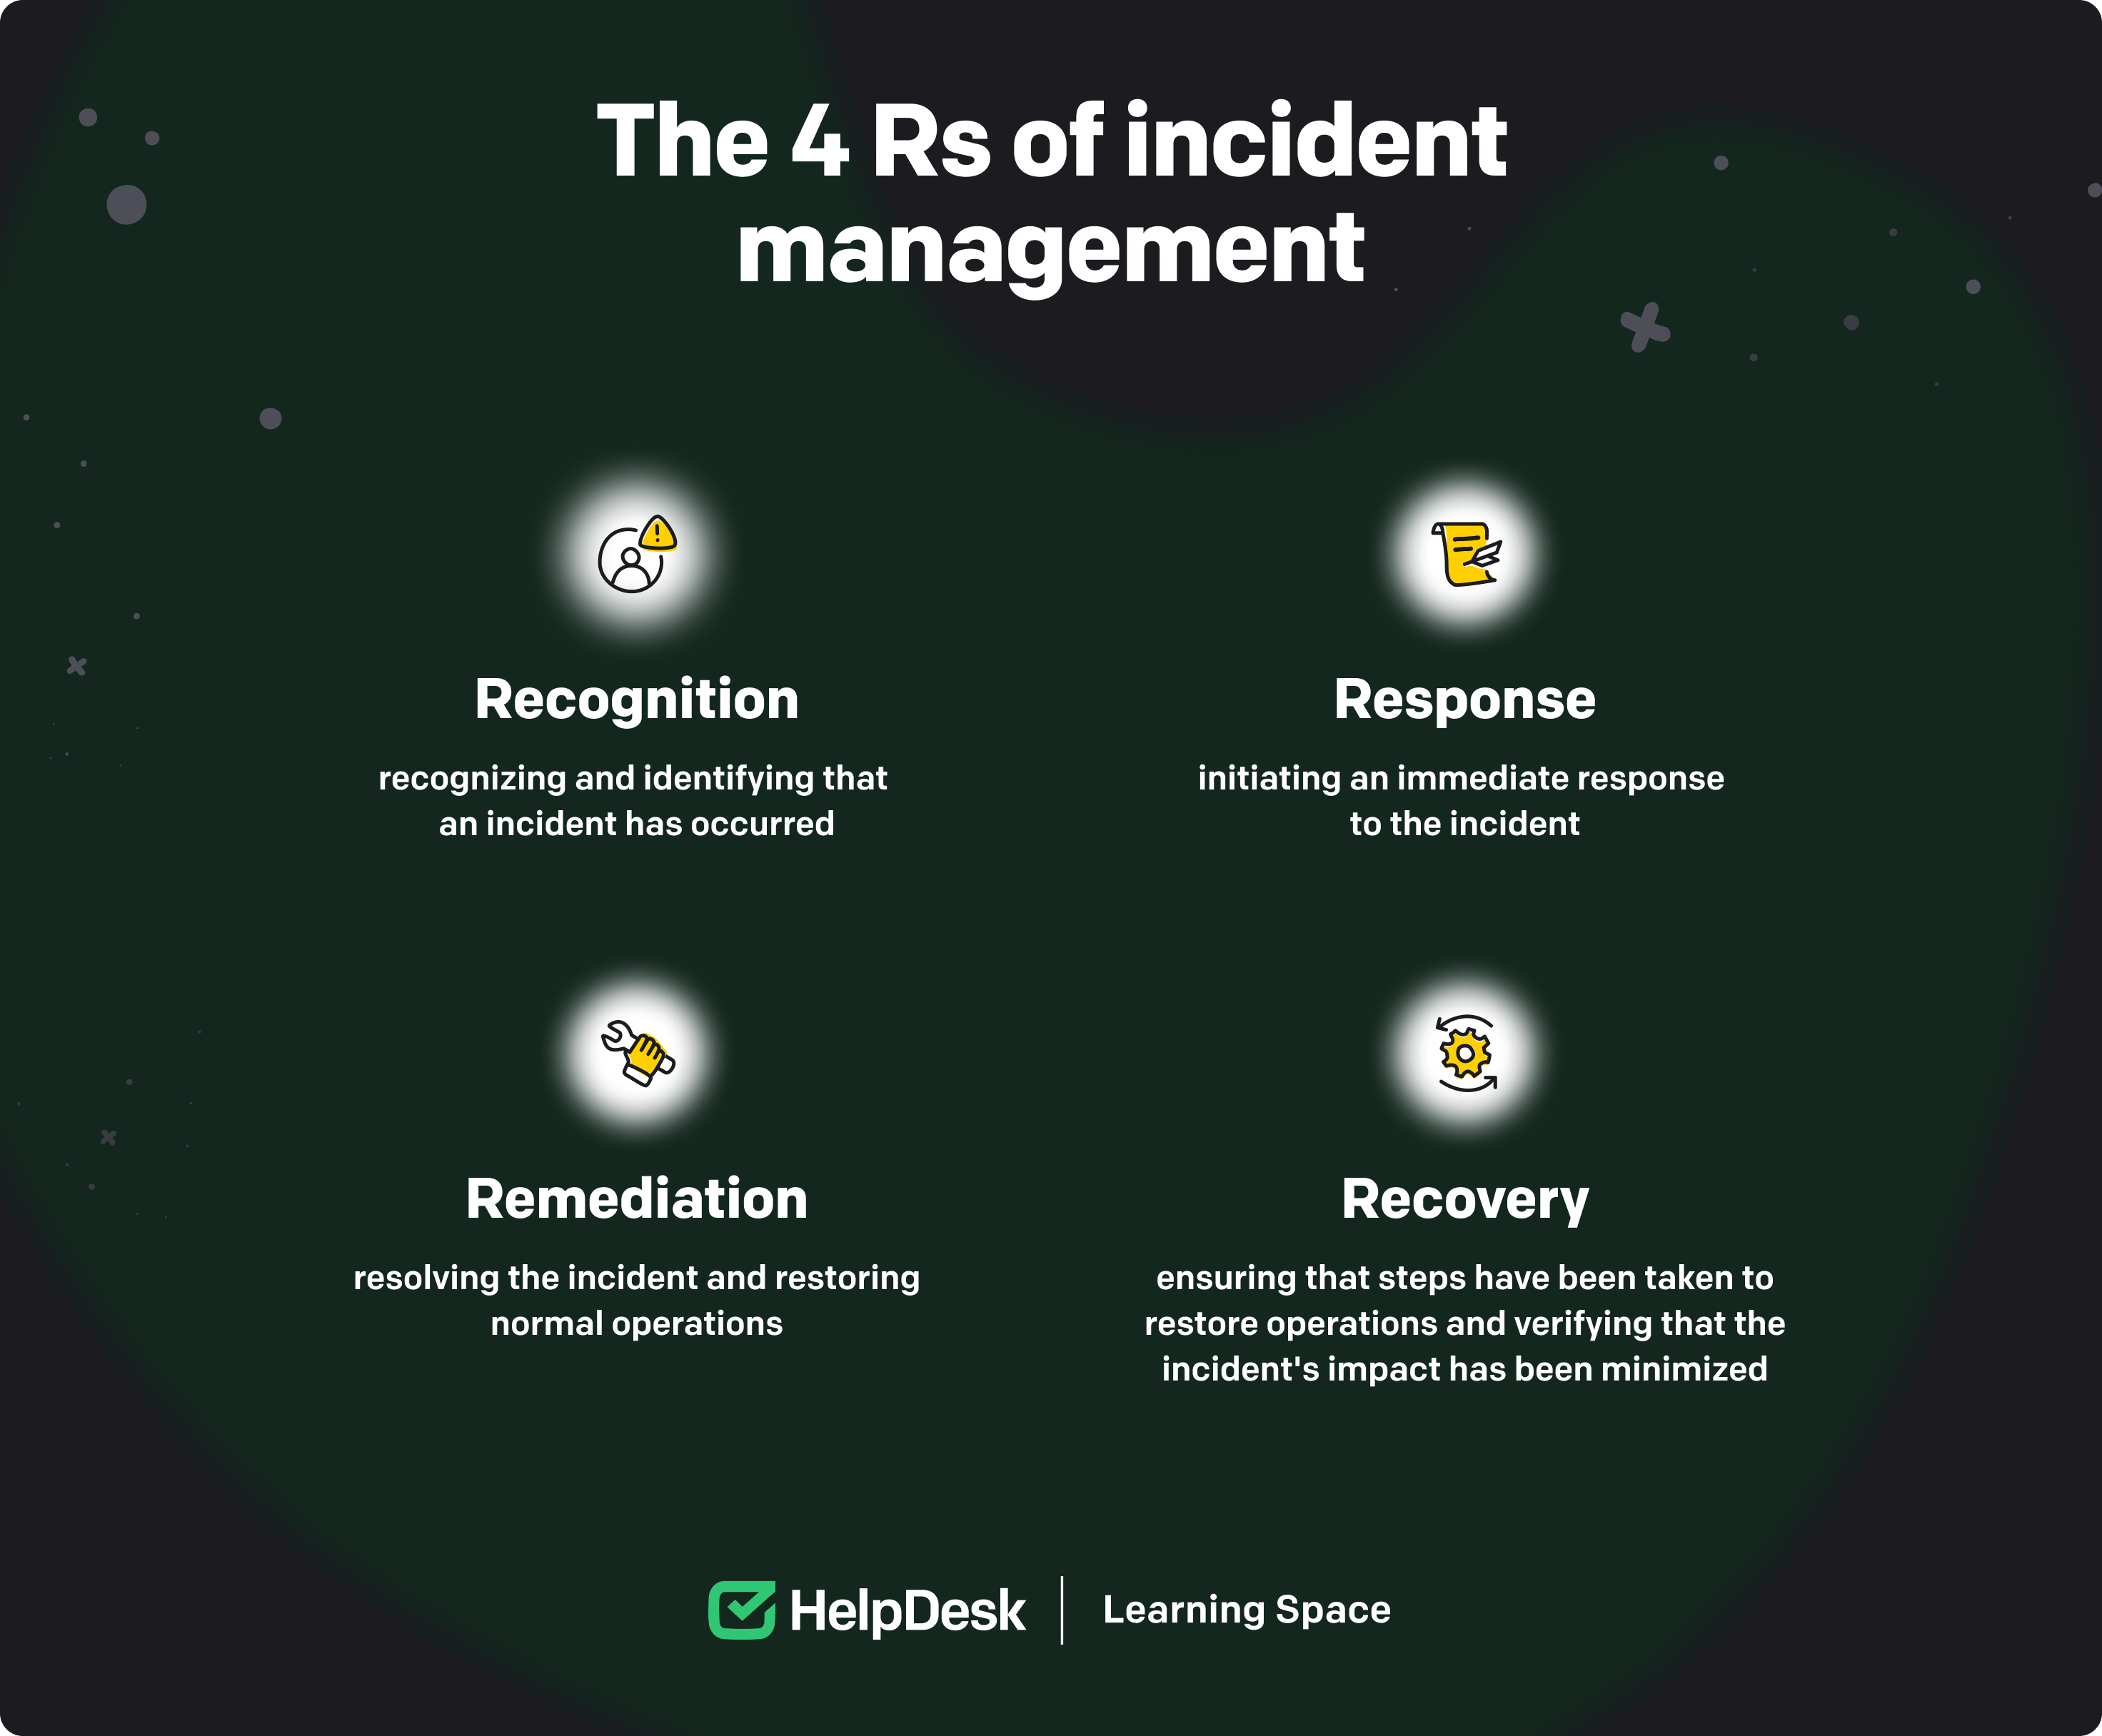 The 4 Rs of incident management.